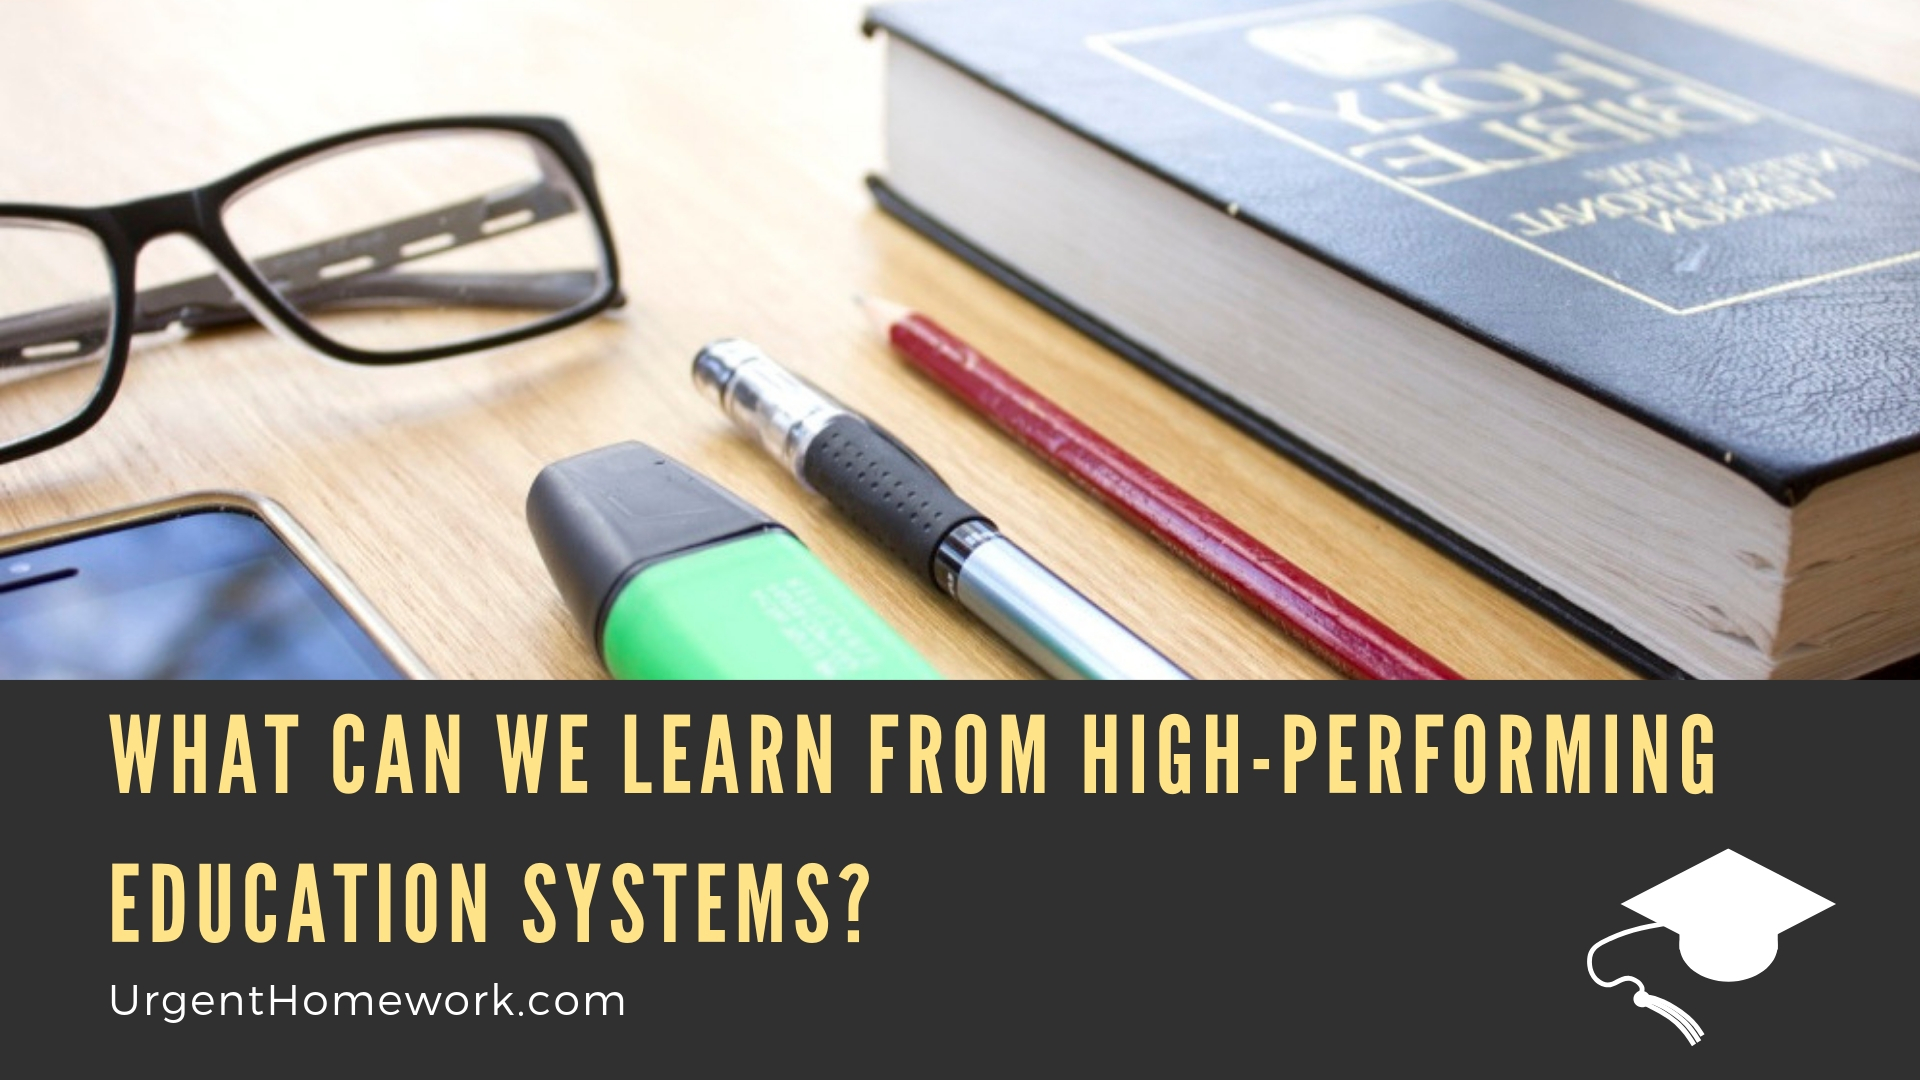 What Can We Learn from High-Performing Education Systems?